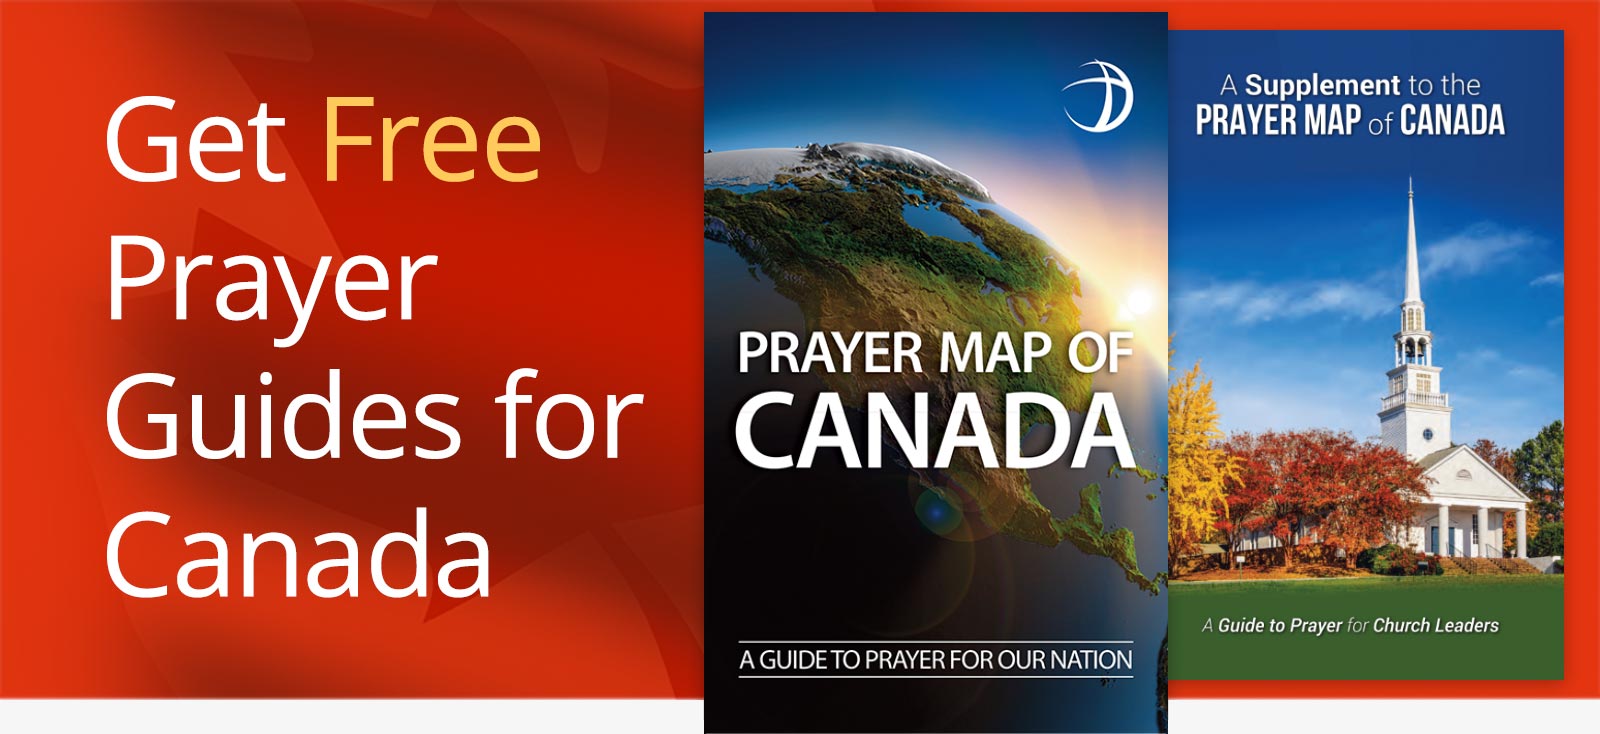 Get free prayer guides for Canada